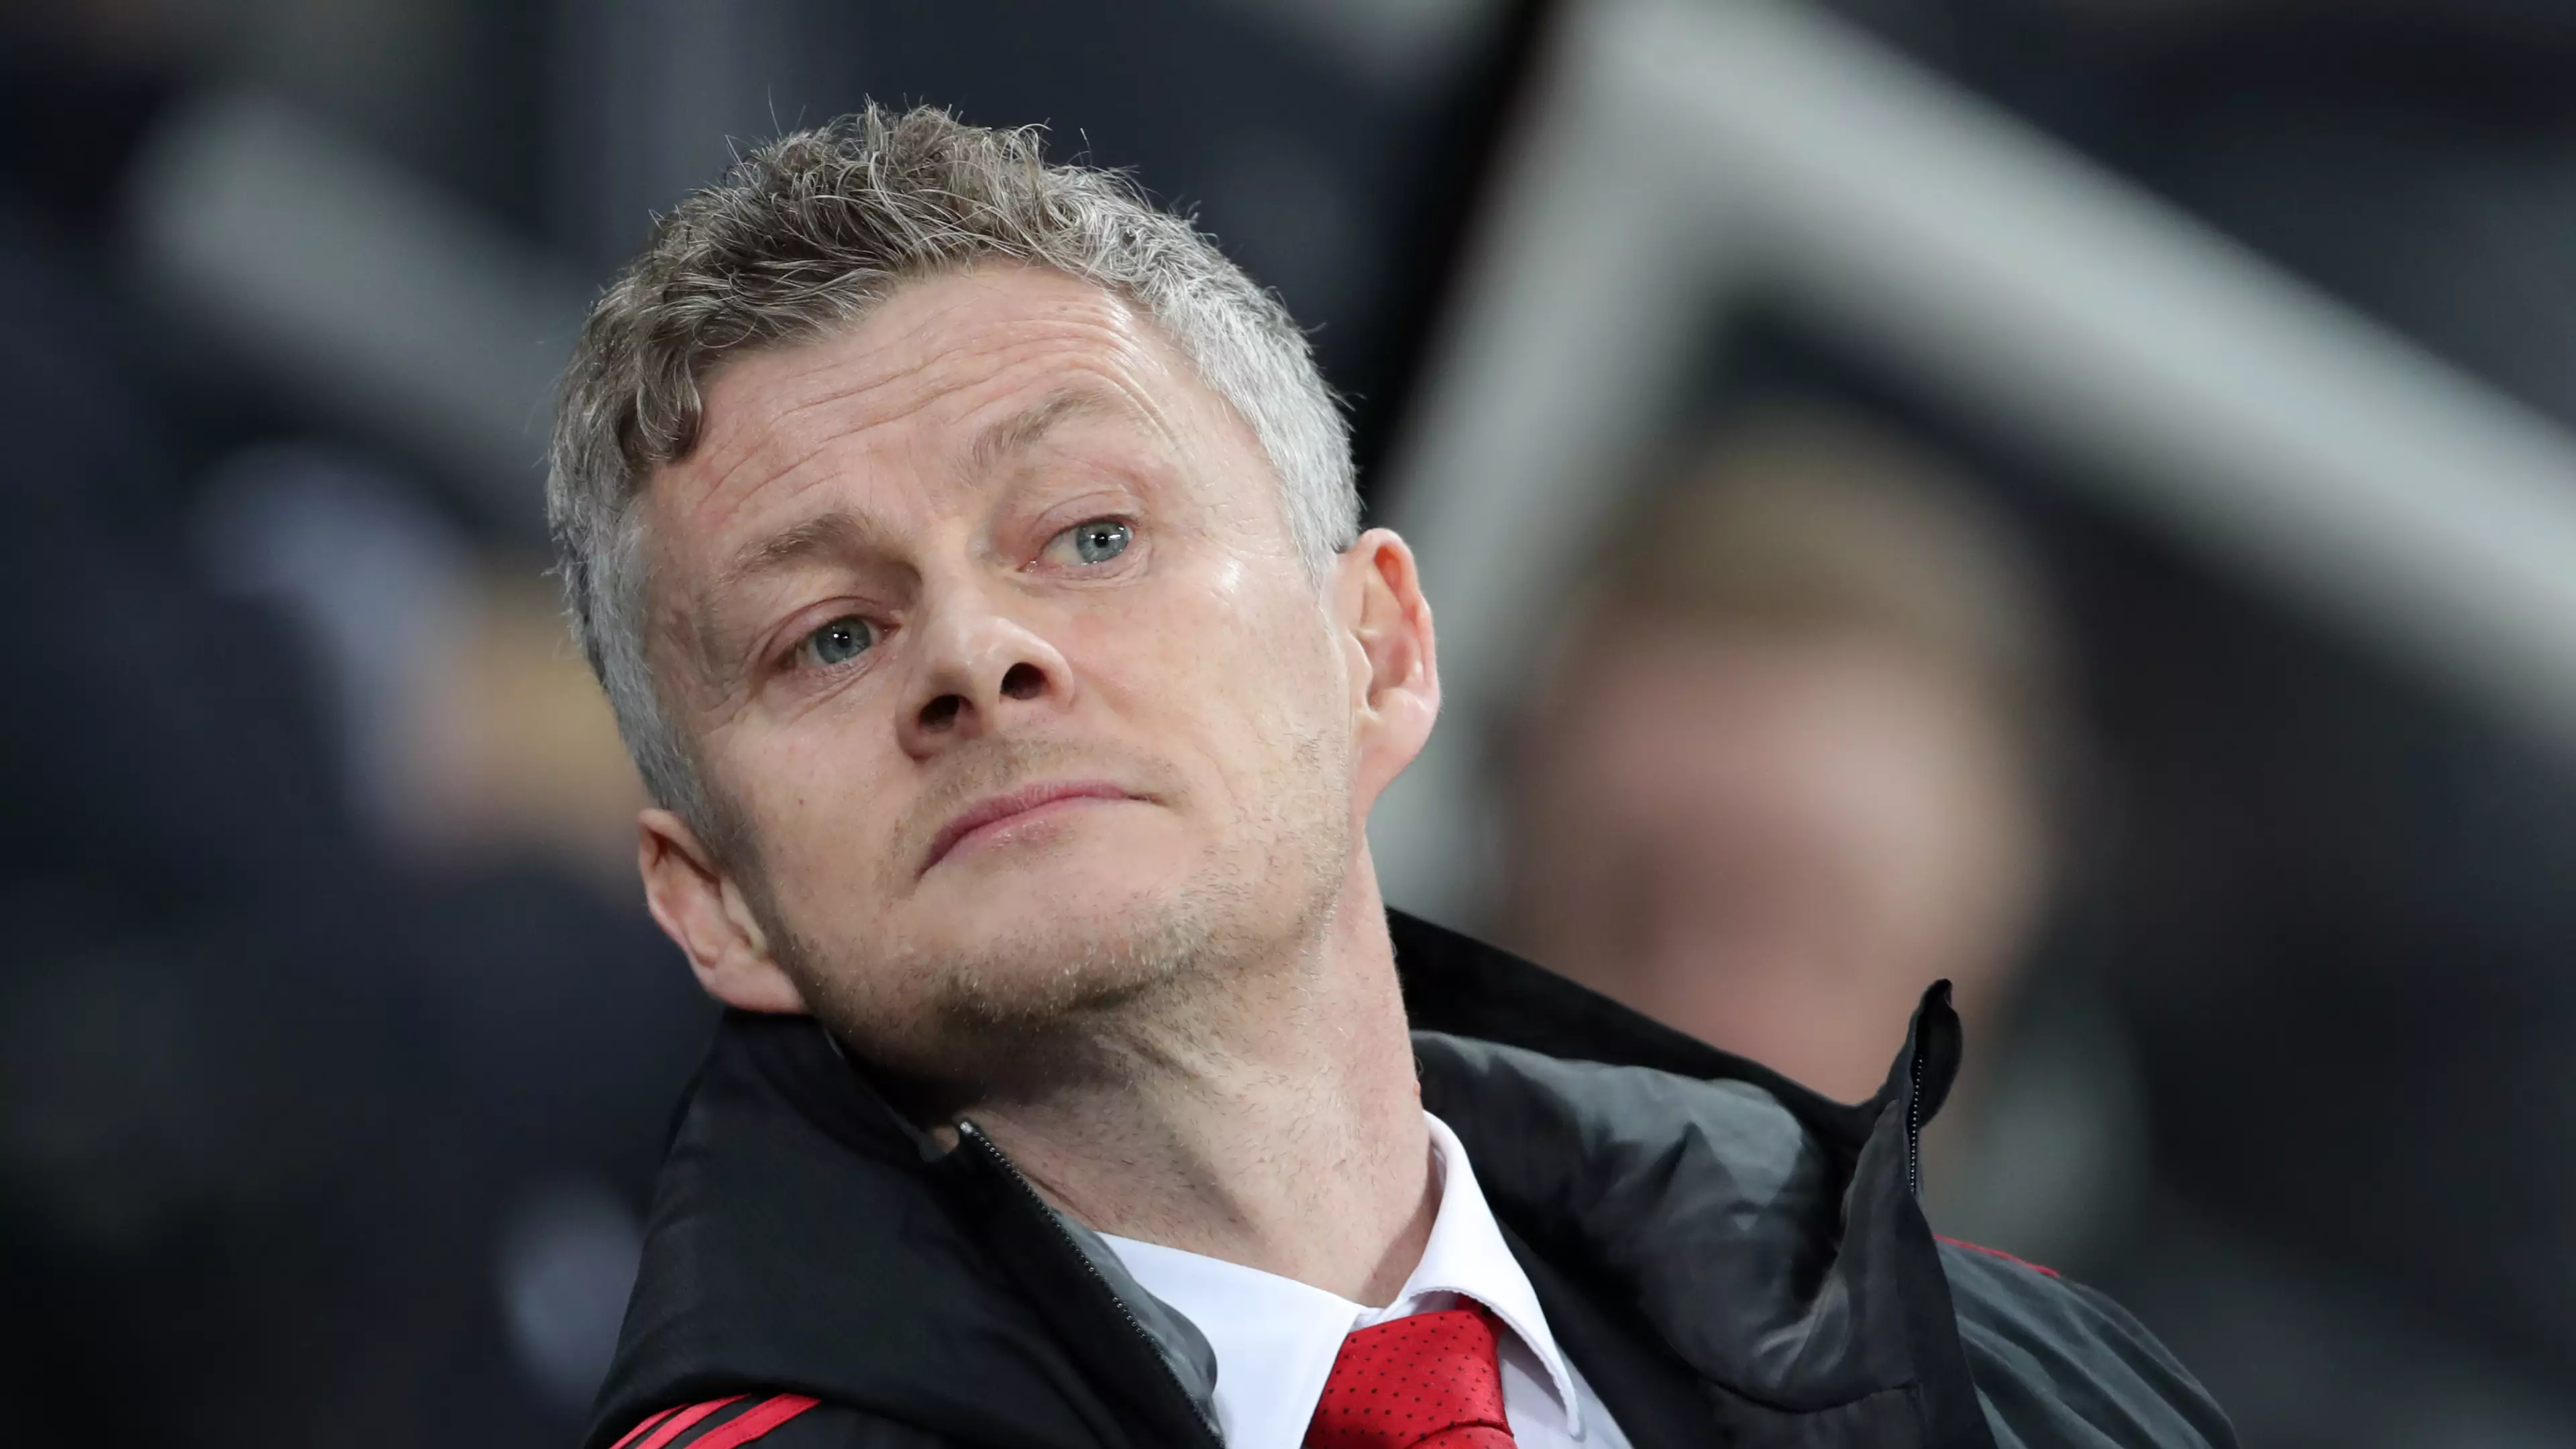 What Ole Gunnar Solskjaer Has To Do To Get Manchester United Job Permanently